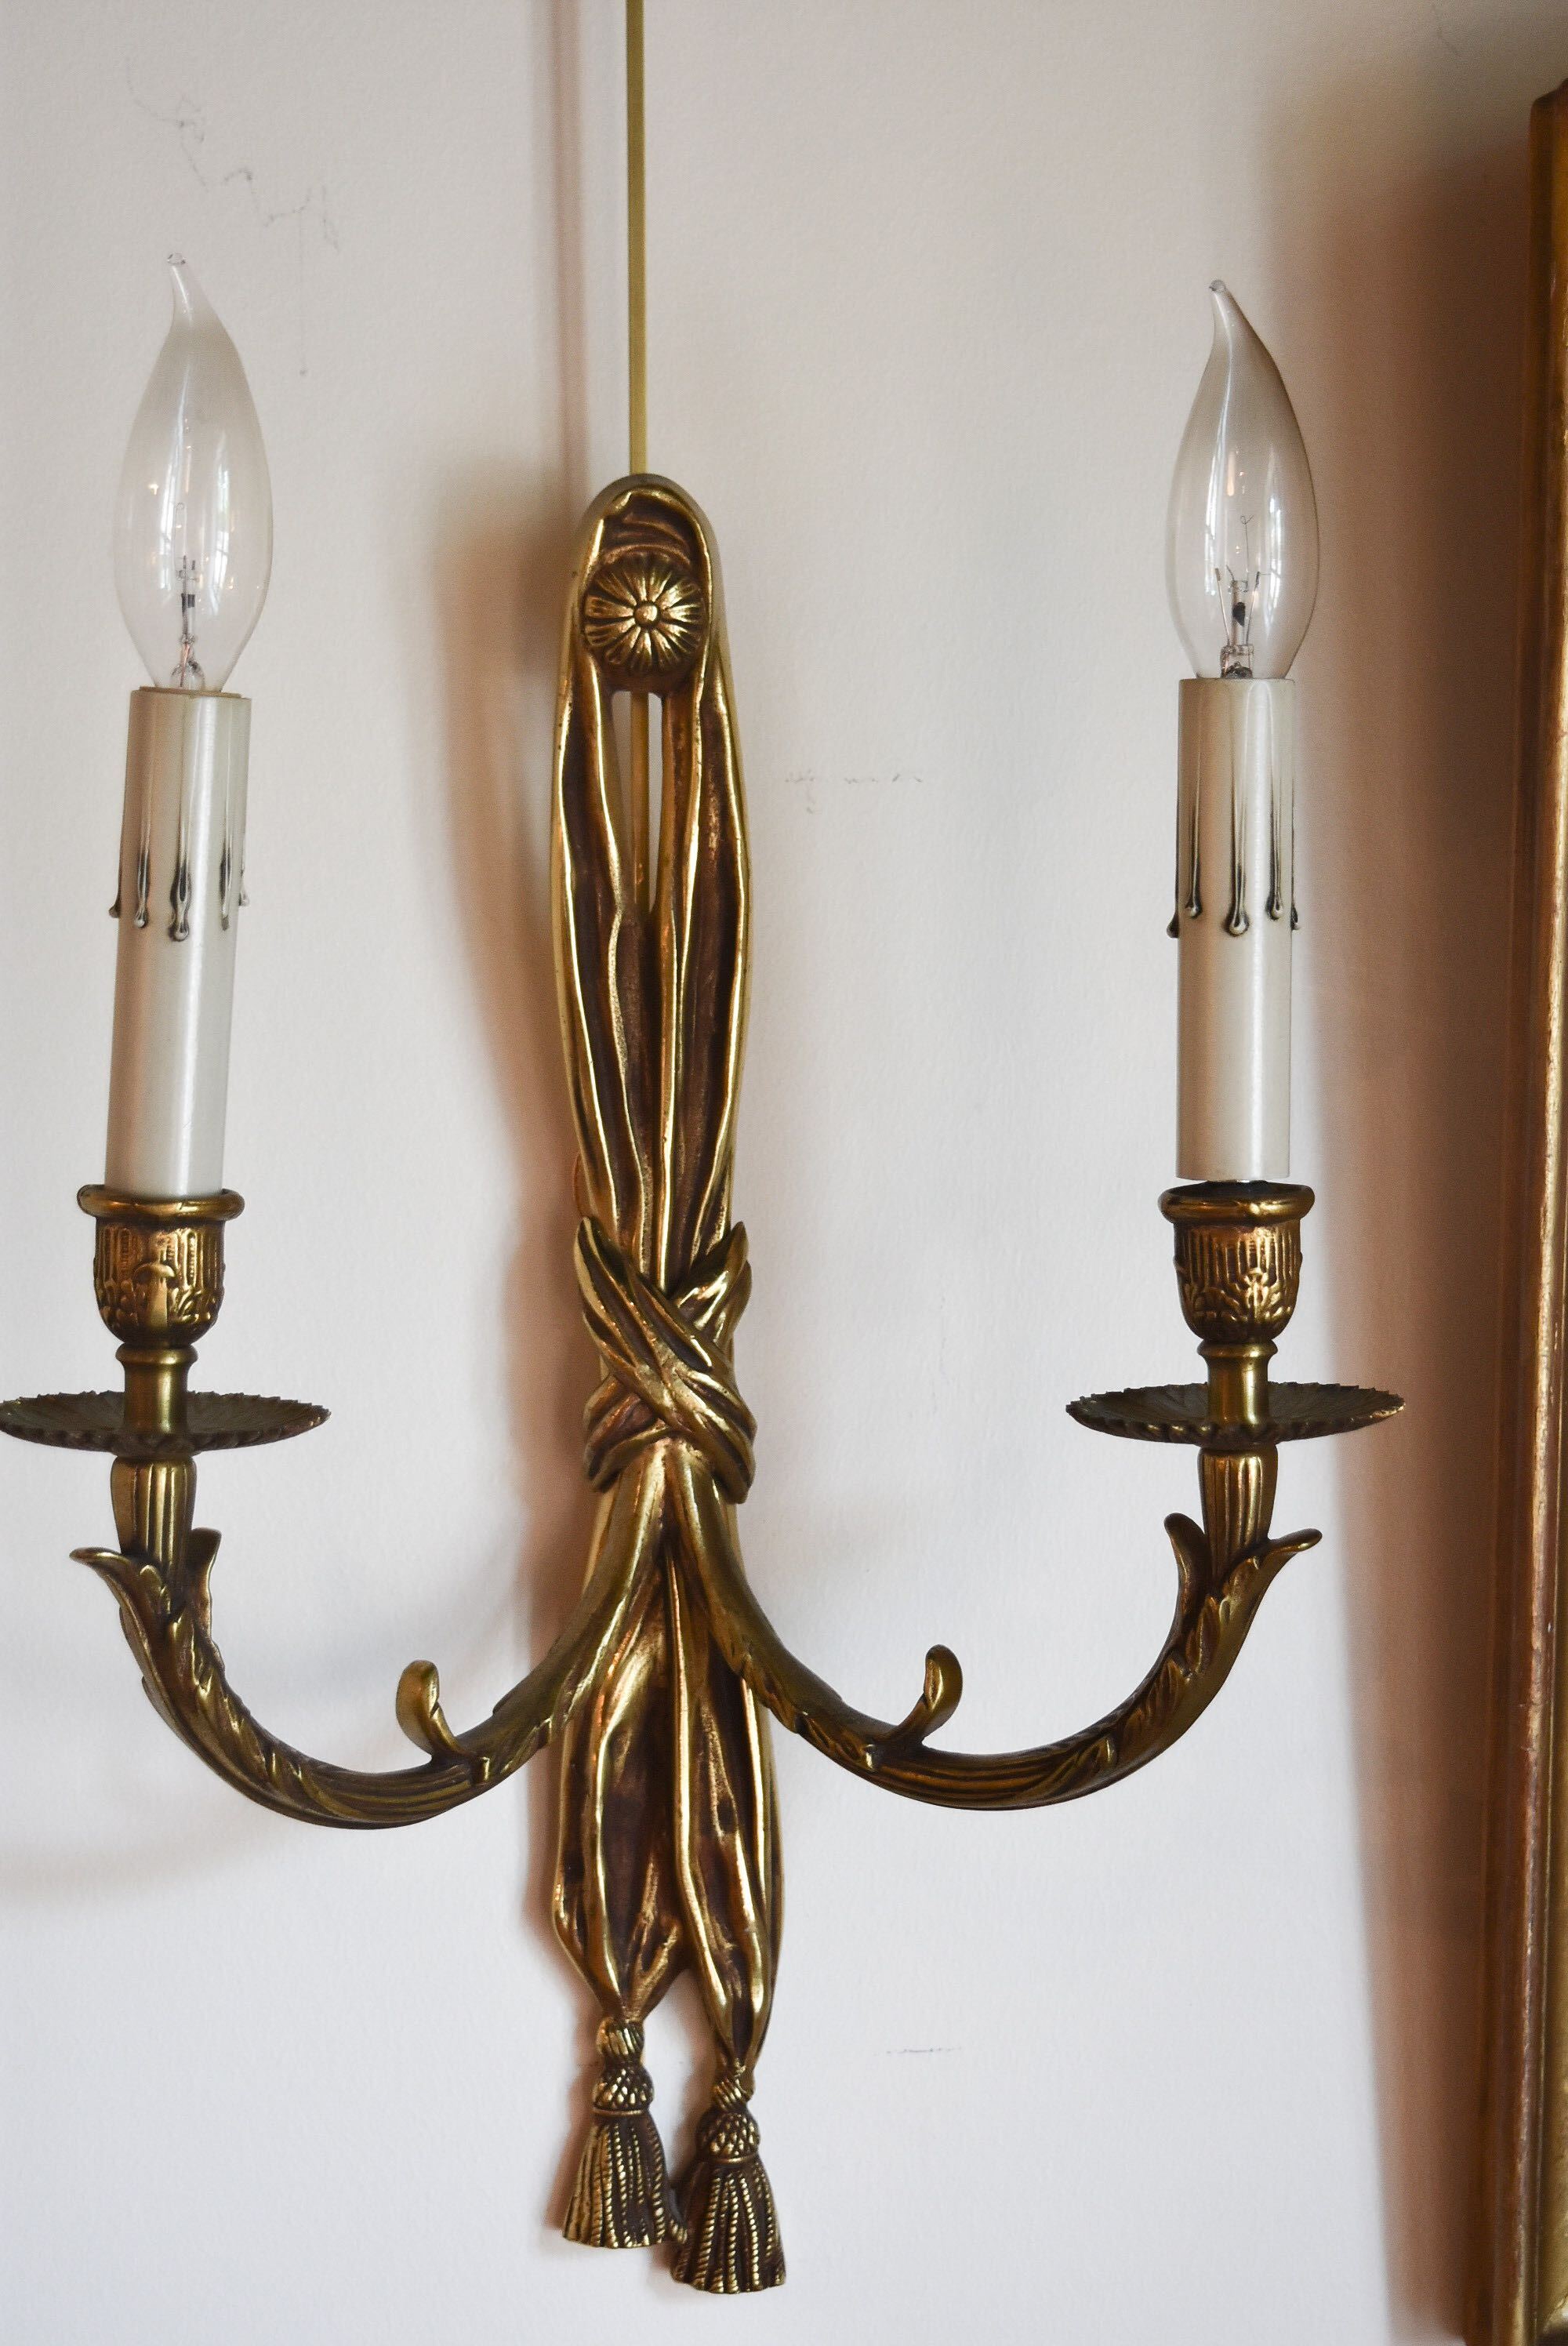 Pair of French Bronze Sconces